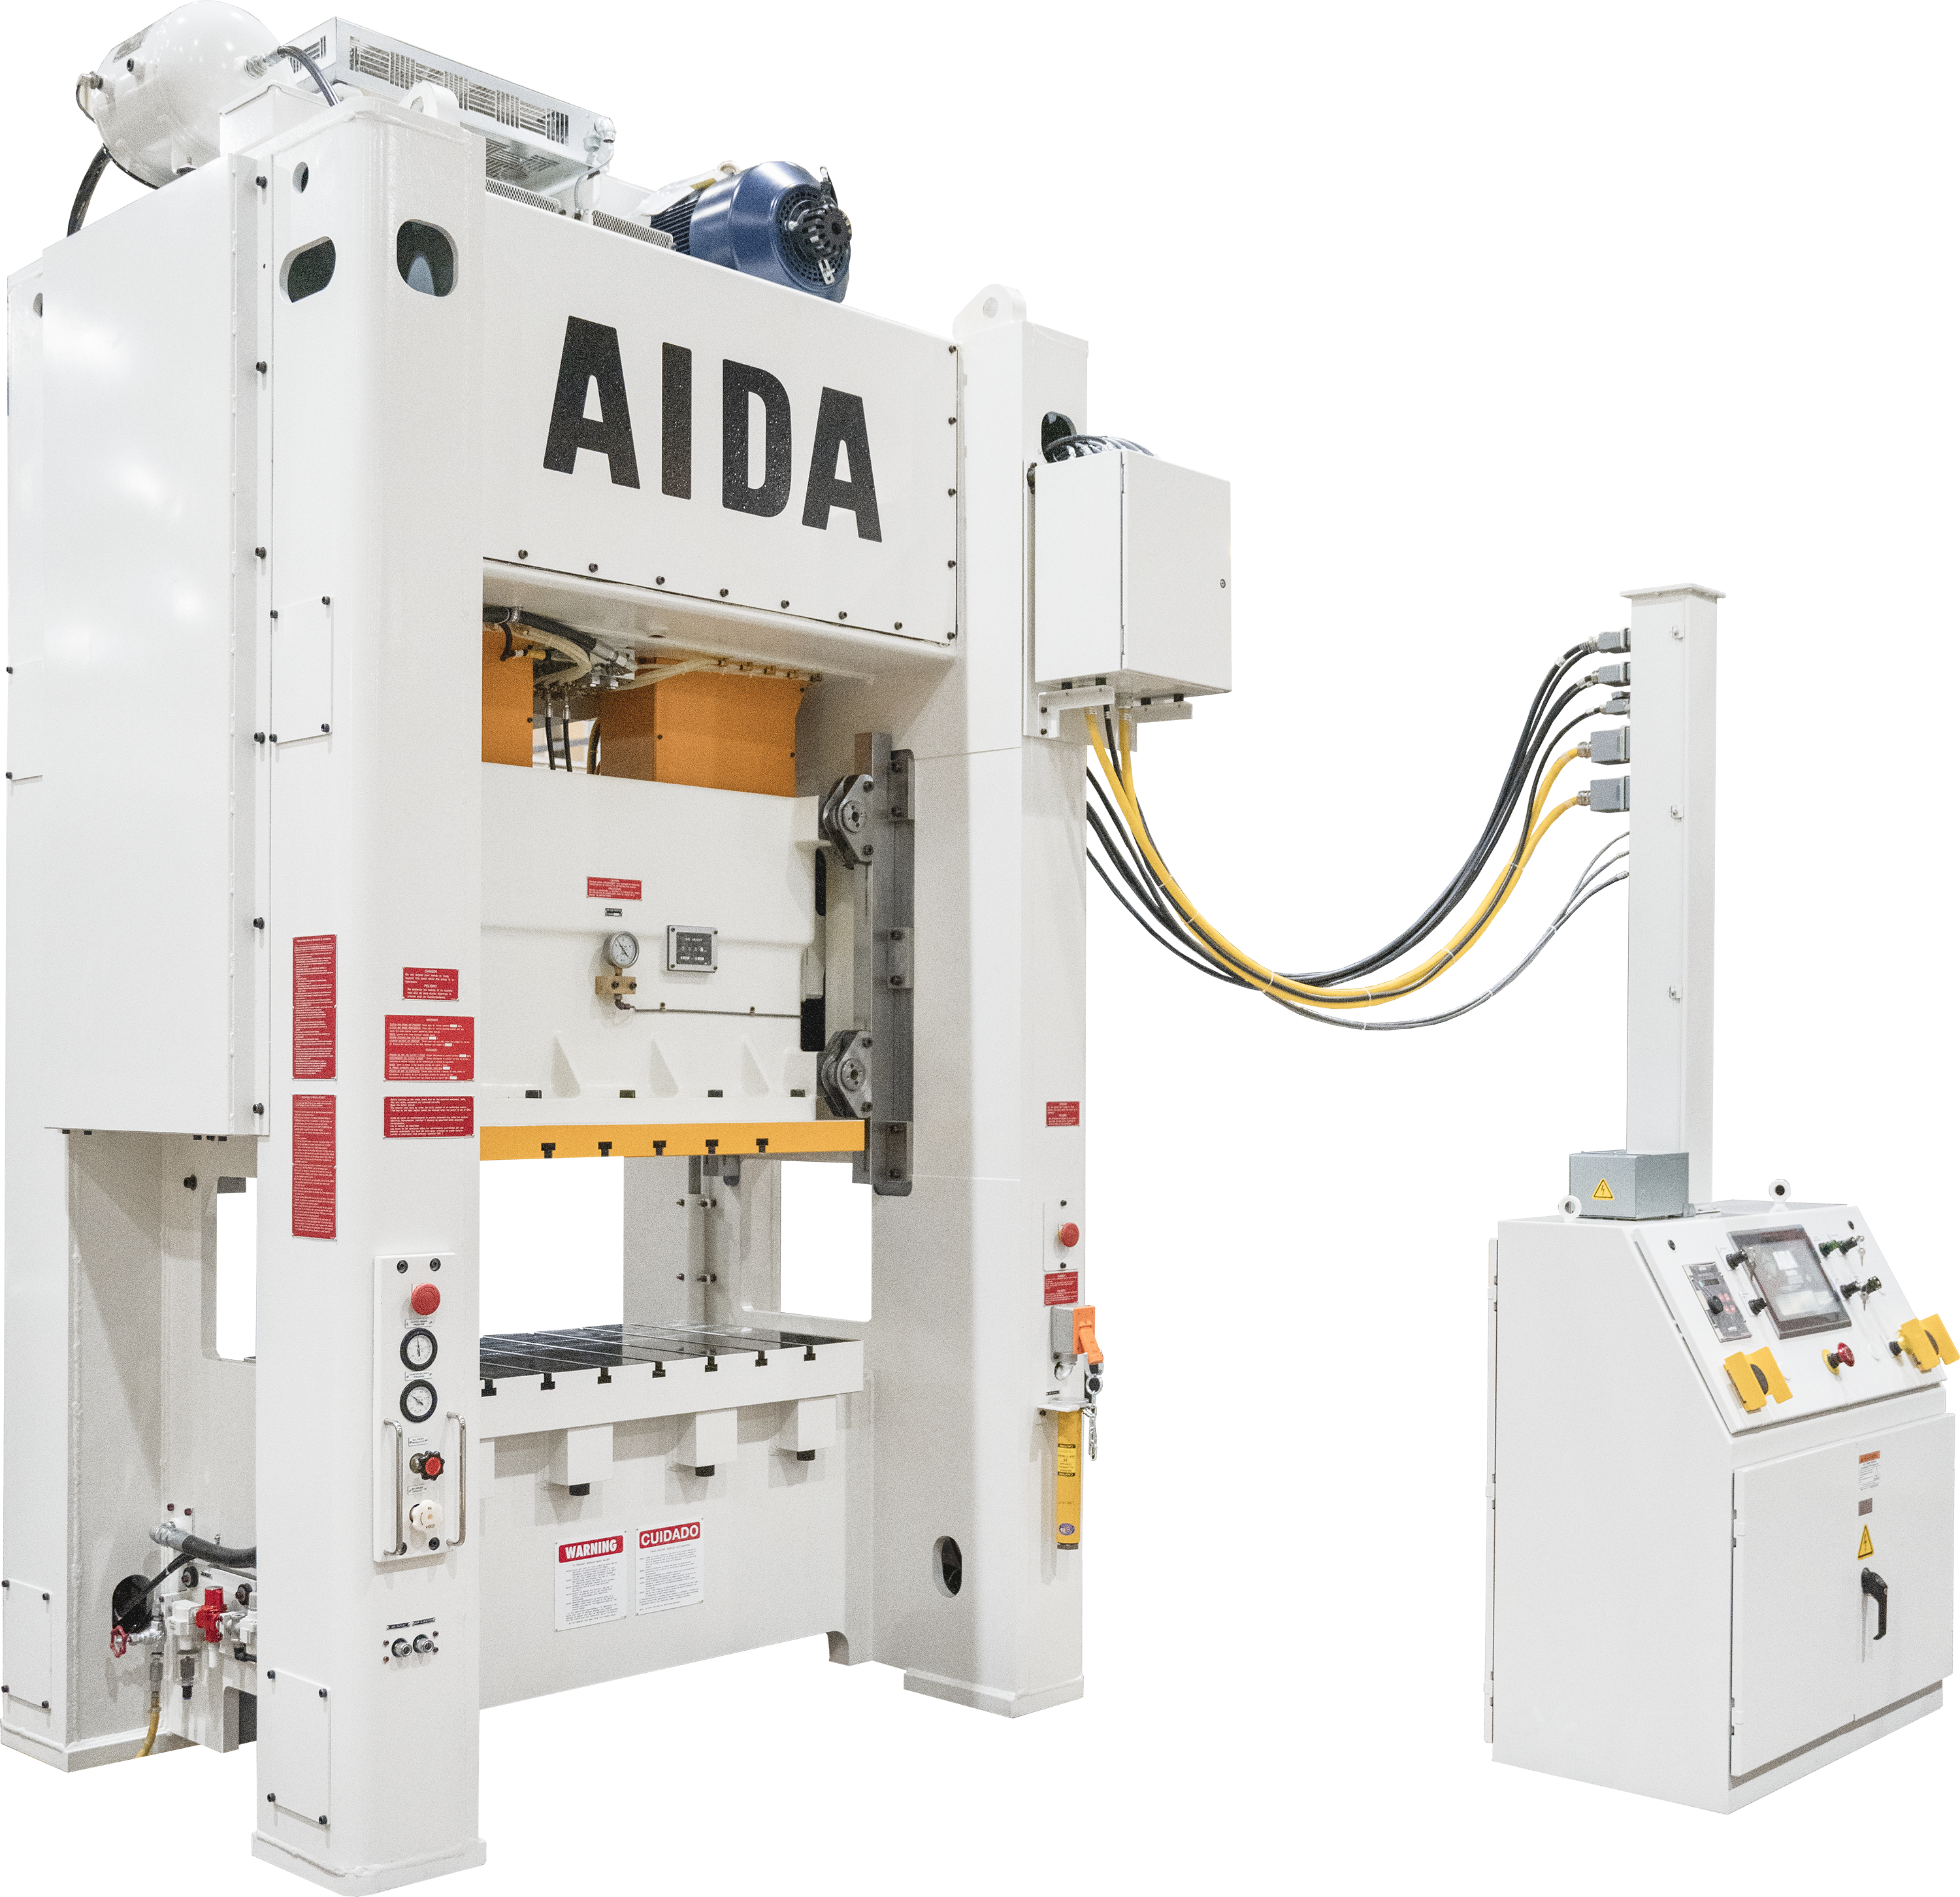 New Mechanical 110-Metric Ton 300 SPM Stamping Press, AIDA-America, metal stamping press manufacturer, NSX mechanical stamping press, 120-to-300 strokes per minute (SPM), Quill mounted flywheel, Variable frequency main motor, 65 mm stroke length, Bed size of 50” L-R, Slide and bolster JIC T-slots on 6” centers, Eight programmable limit switch (PLS) circuits, Link OmniLink 5000, Wintriss SmartPAC controls, peak/reverse tonnage monitor,. 16 channel die protection